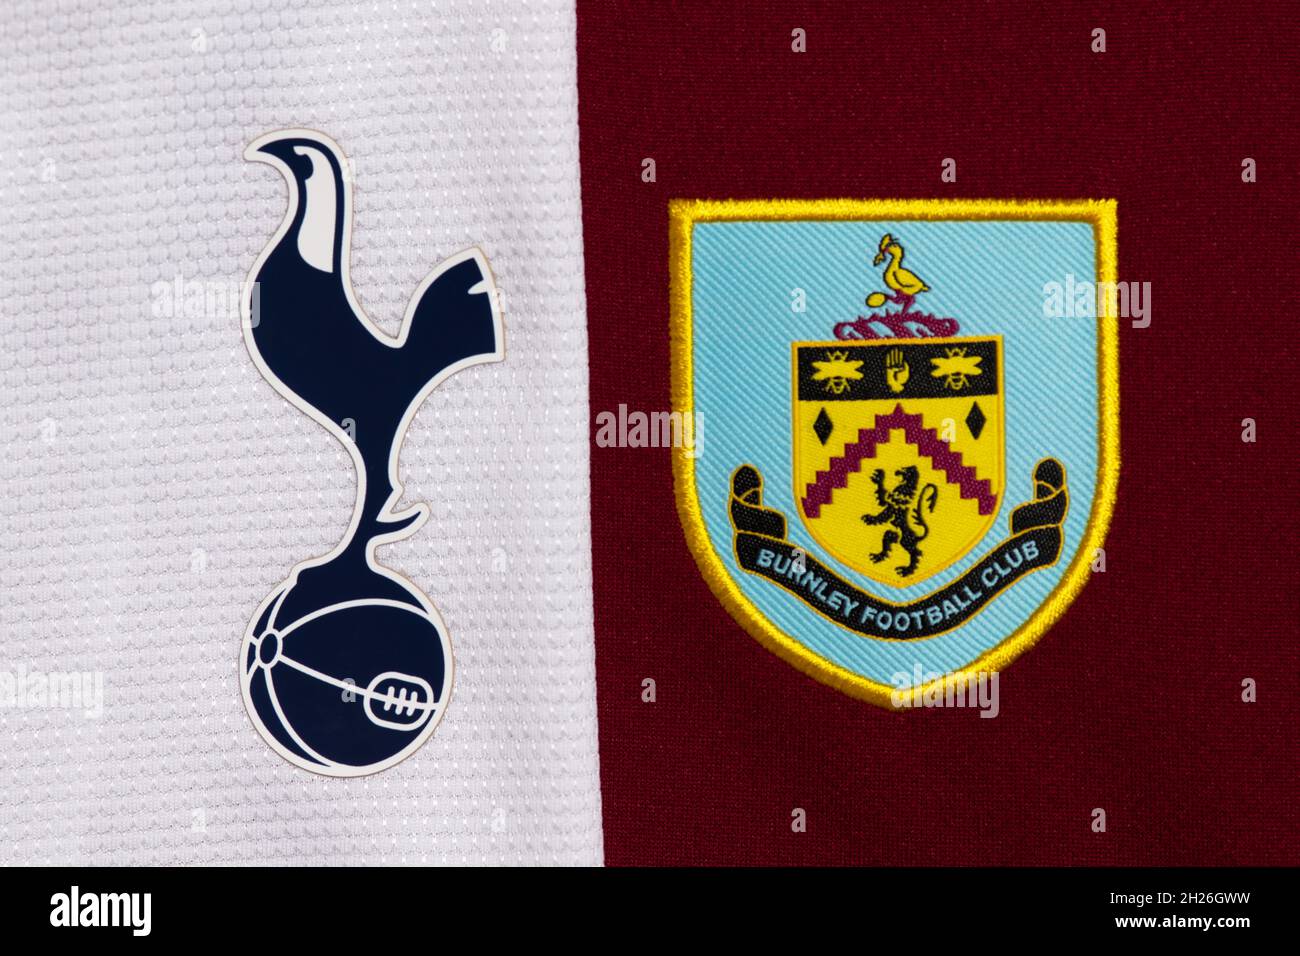 Close up of Burnley and Spurs club crest. Stock Photo